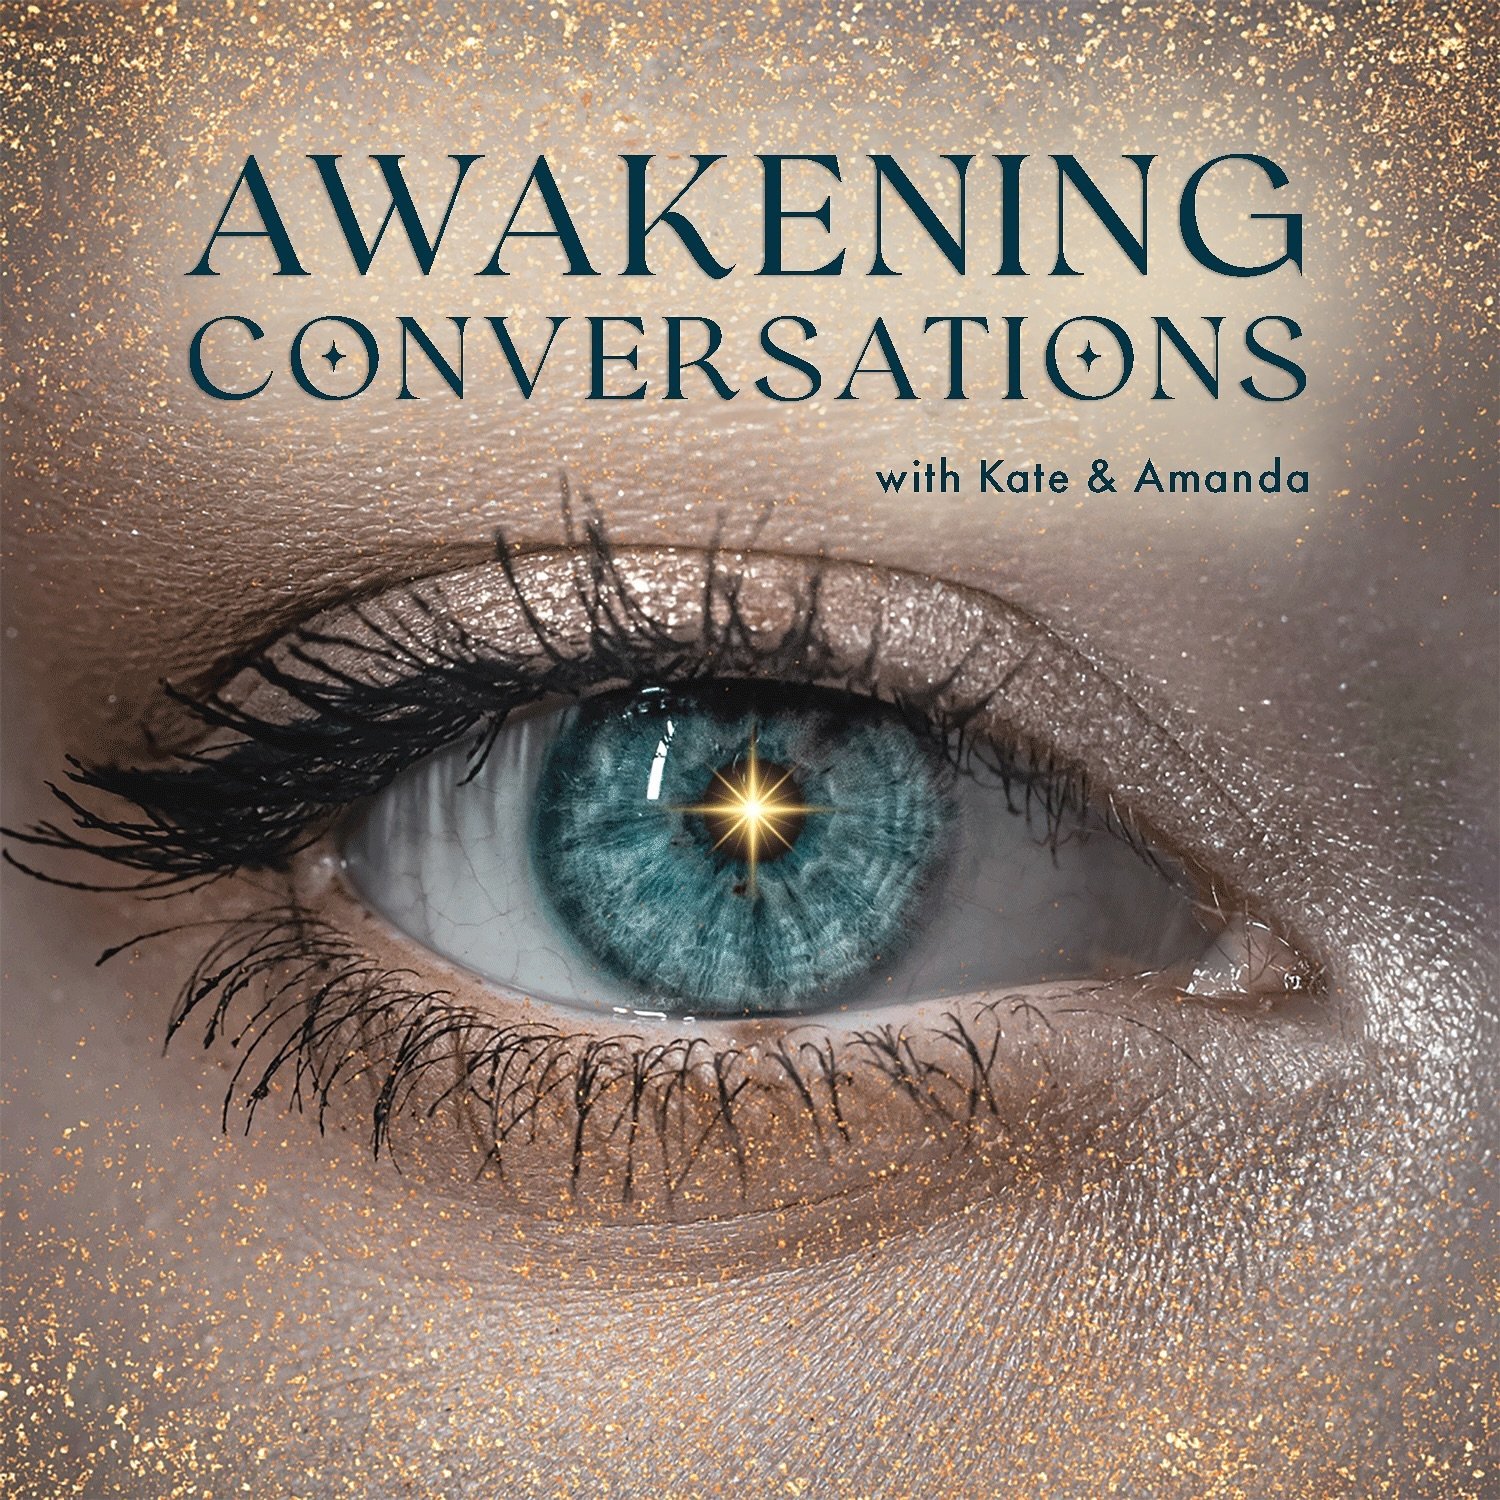 🎙️ I am super excited to announce that our podcast, Awakening Conversations, has now launched! 🙌🏻

Today we have released our first 4 episodes and in these episodes we introduce you to what the podcast will be about, start unpacking the what awake